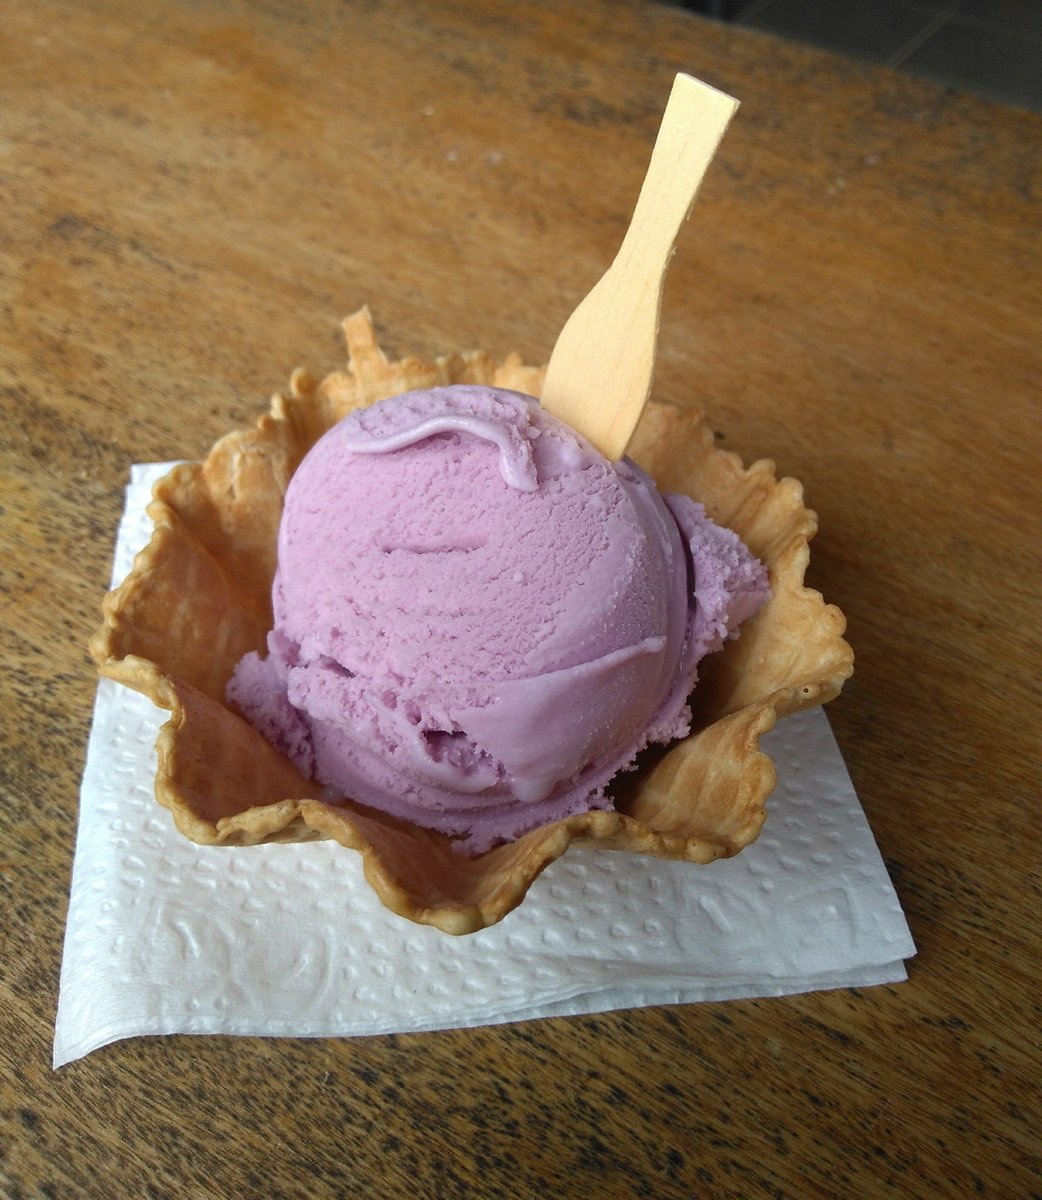 lavender flavored ice cream direct from Lavandario in Cunha